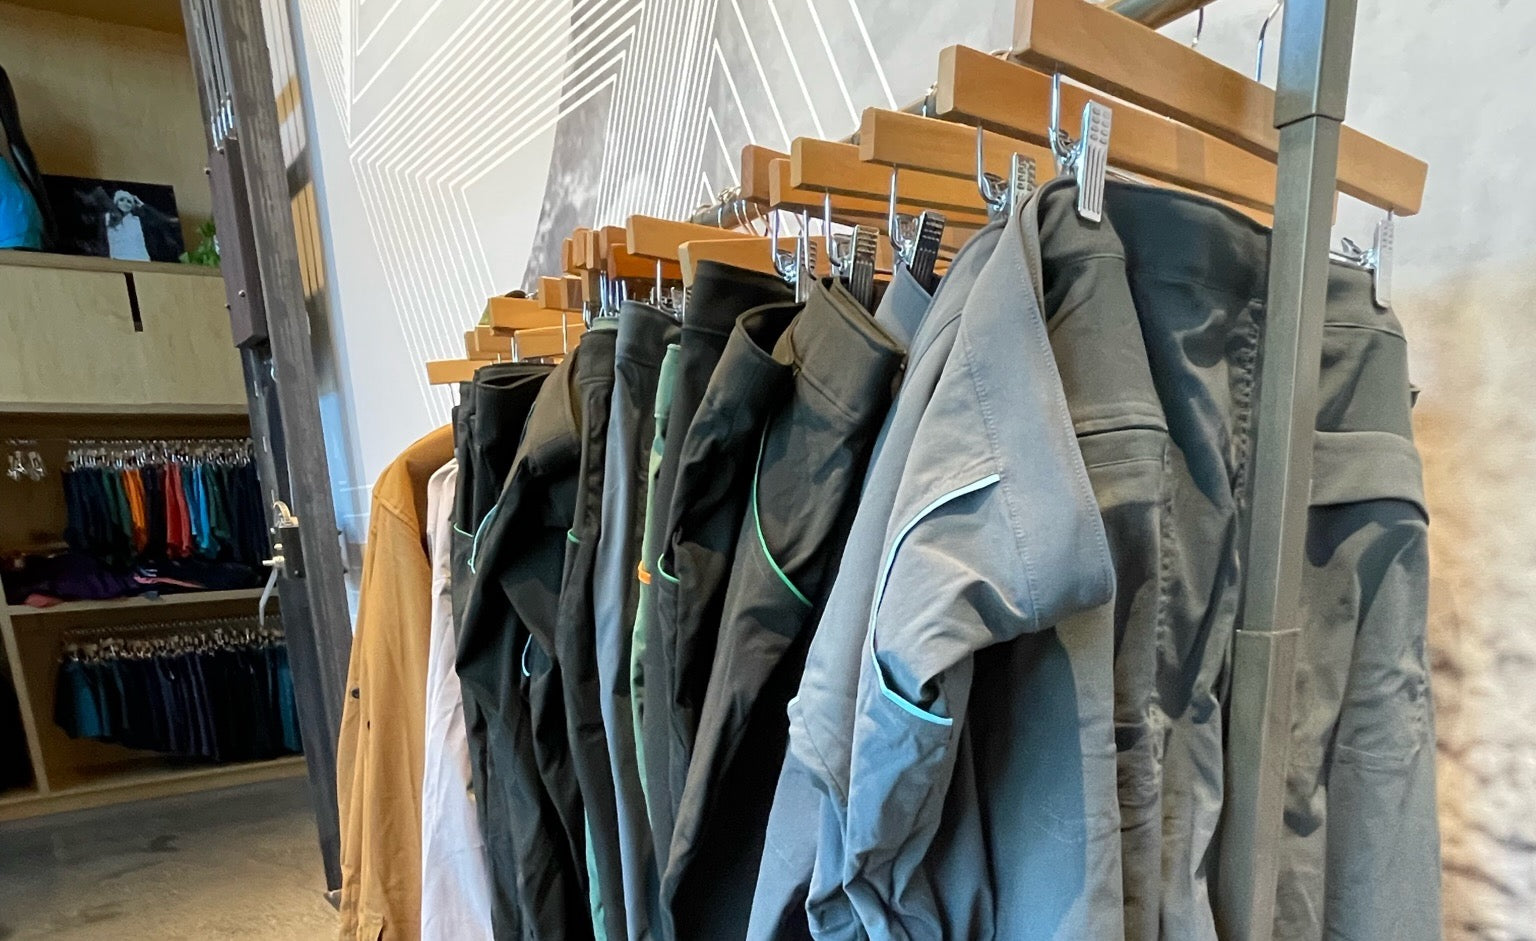 A clothing rack filled with the Ponderosa Pants in a store